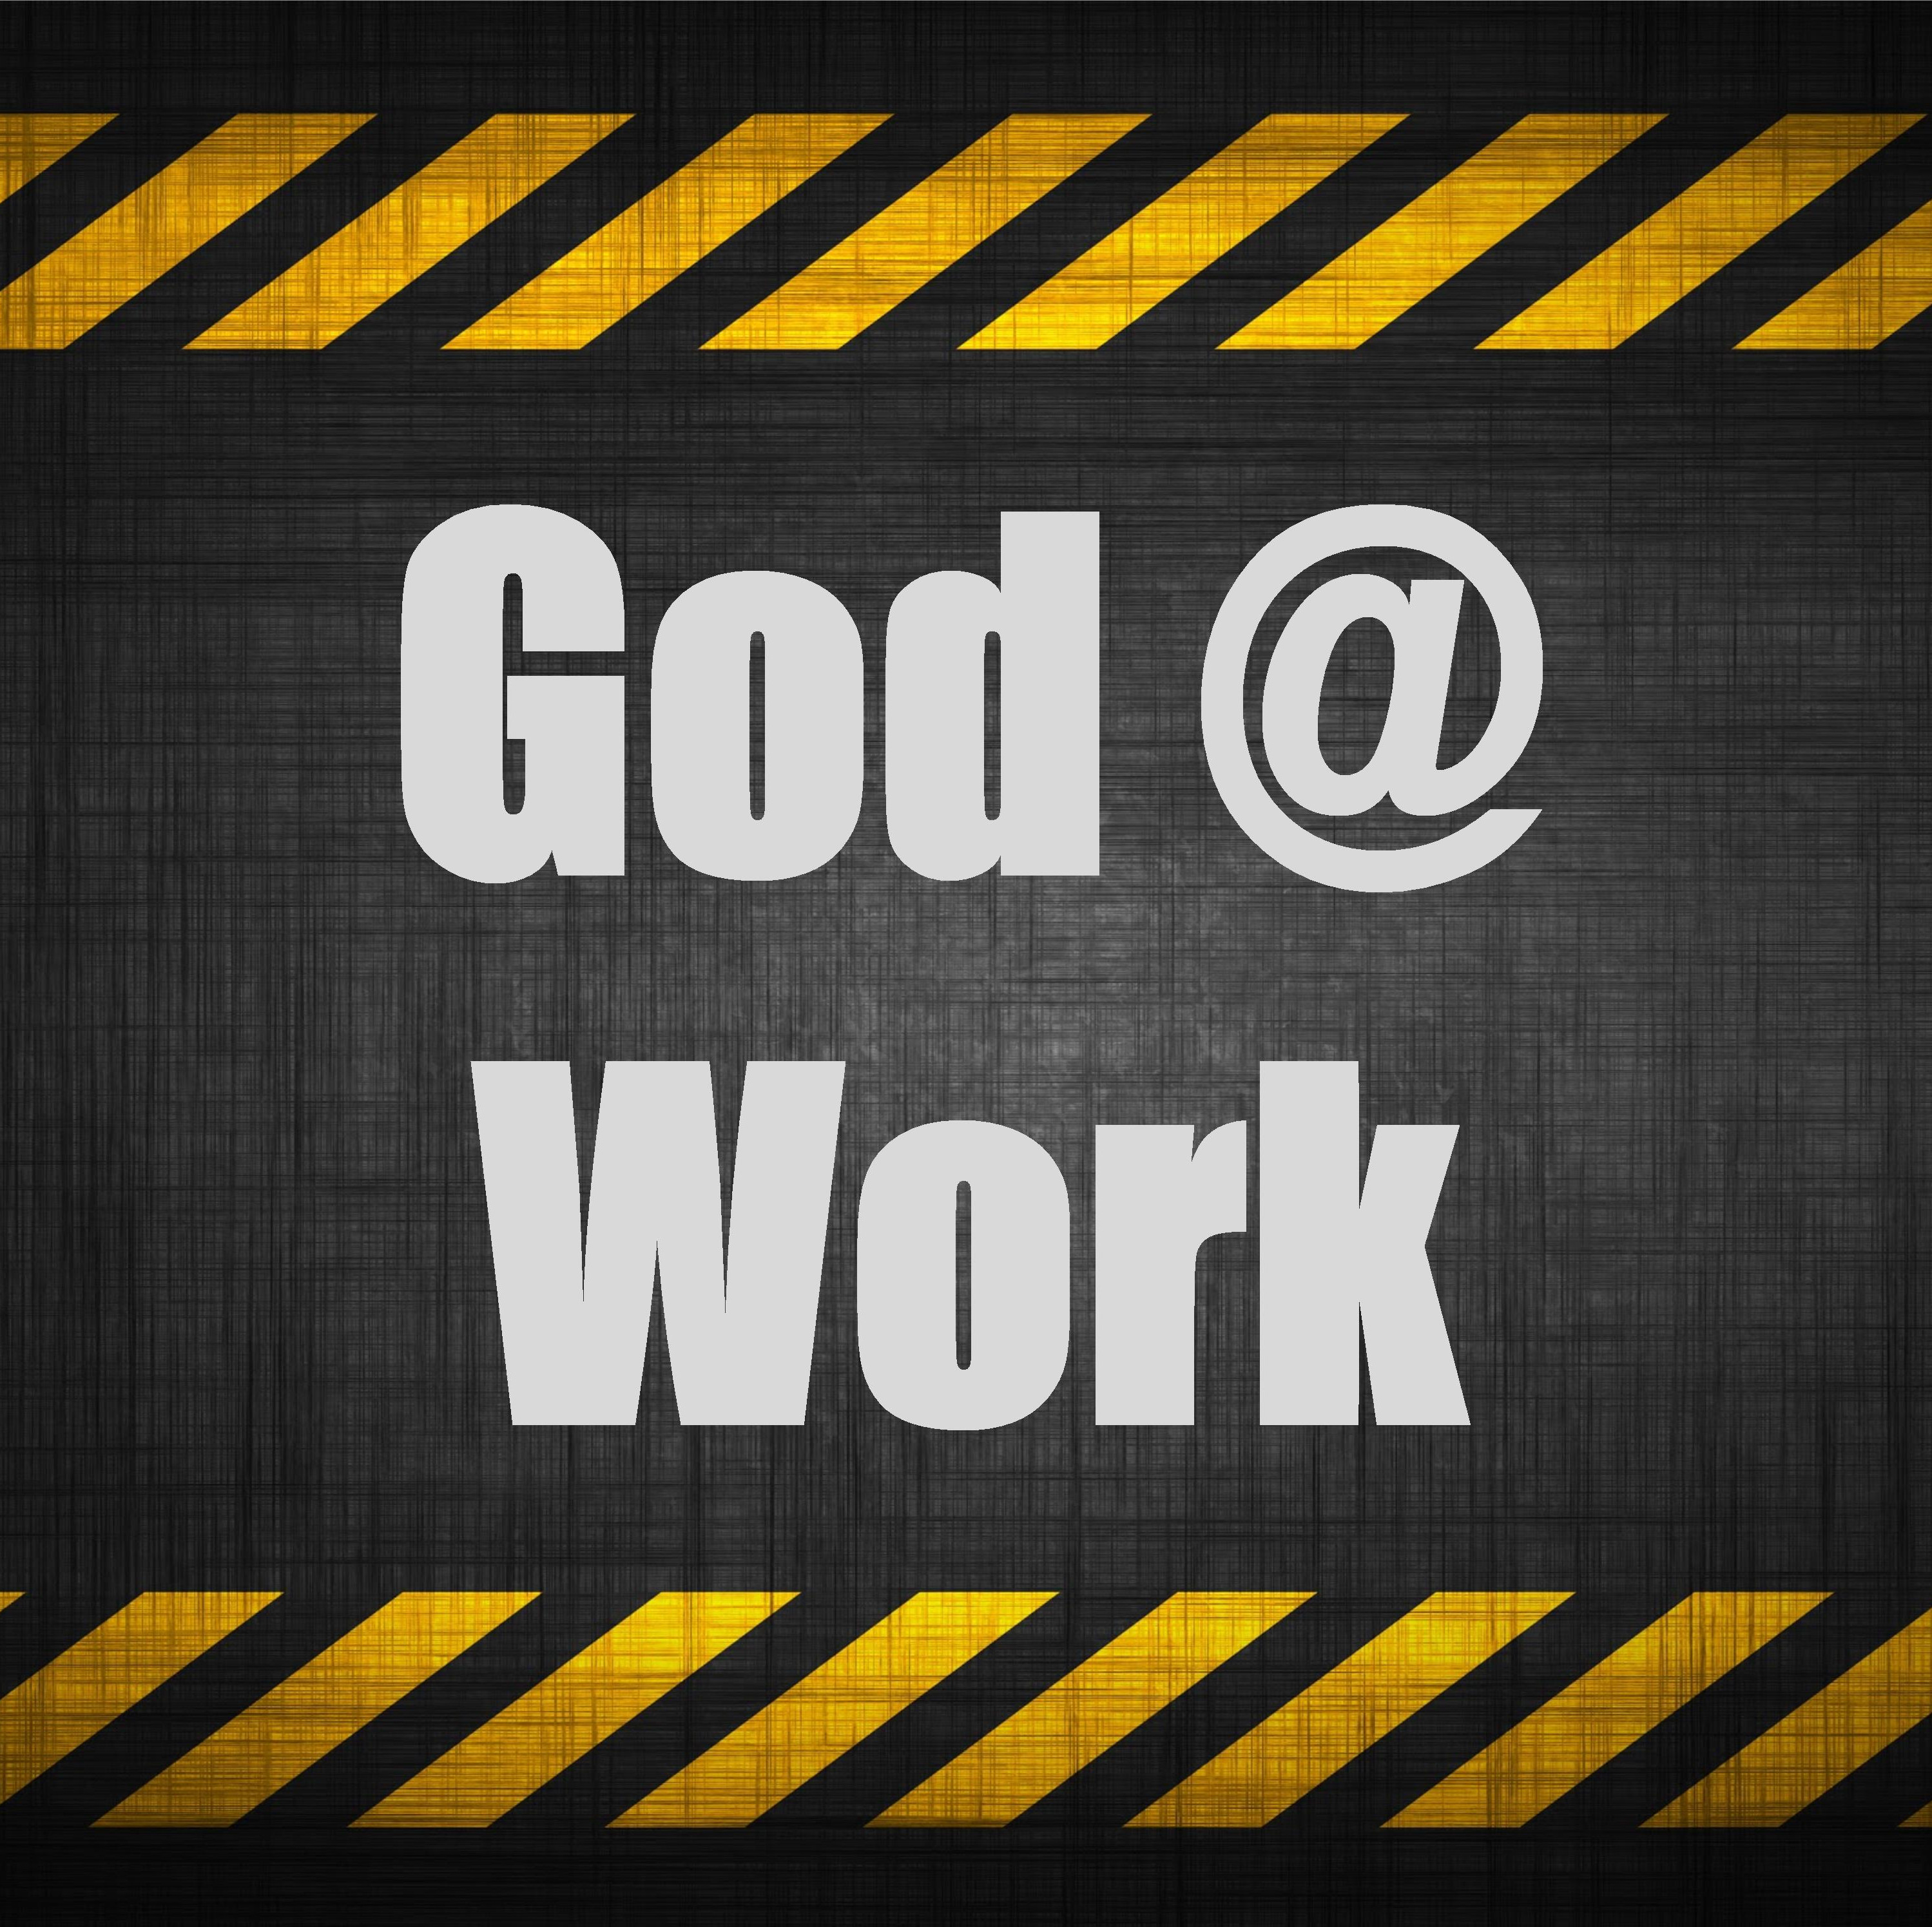 God at Work: Stories of grace and faith